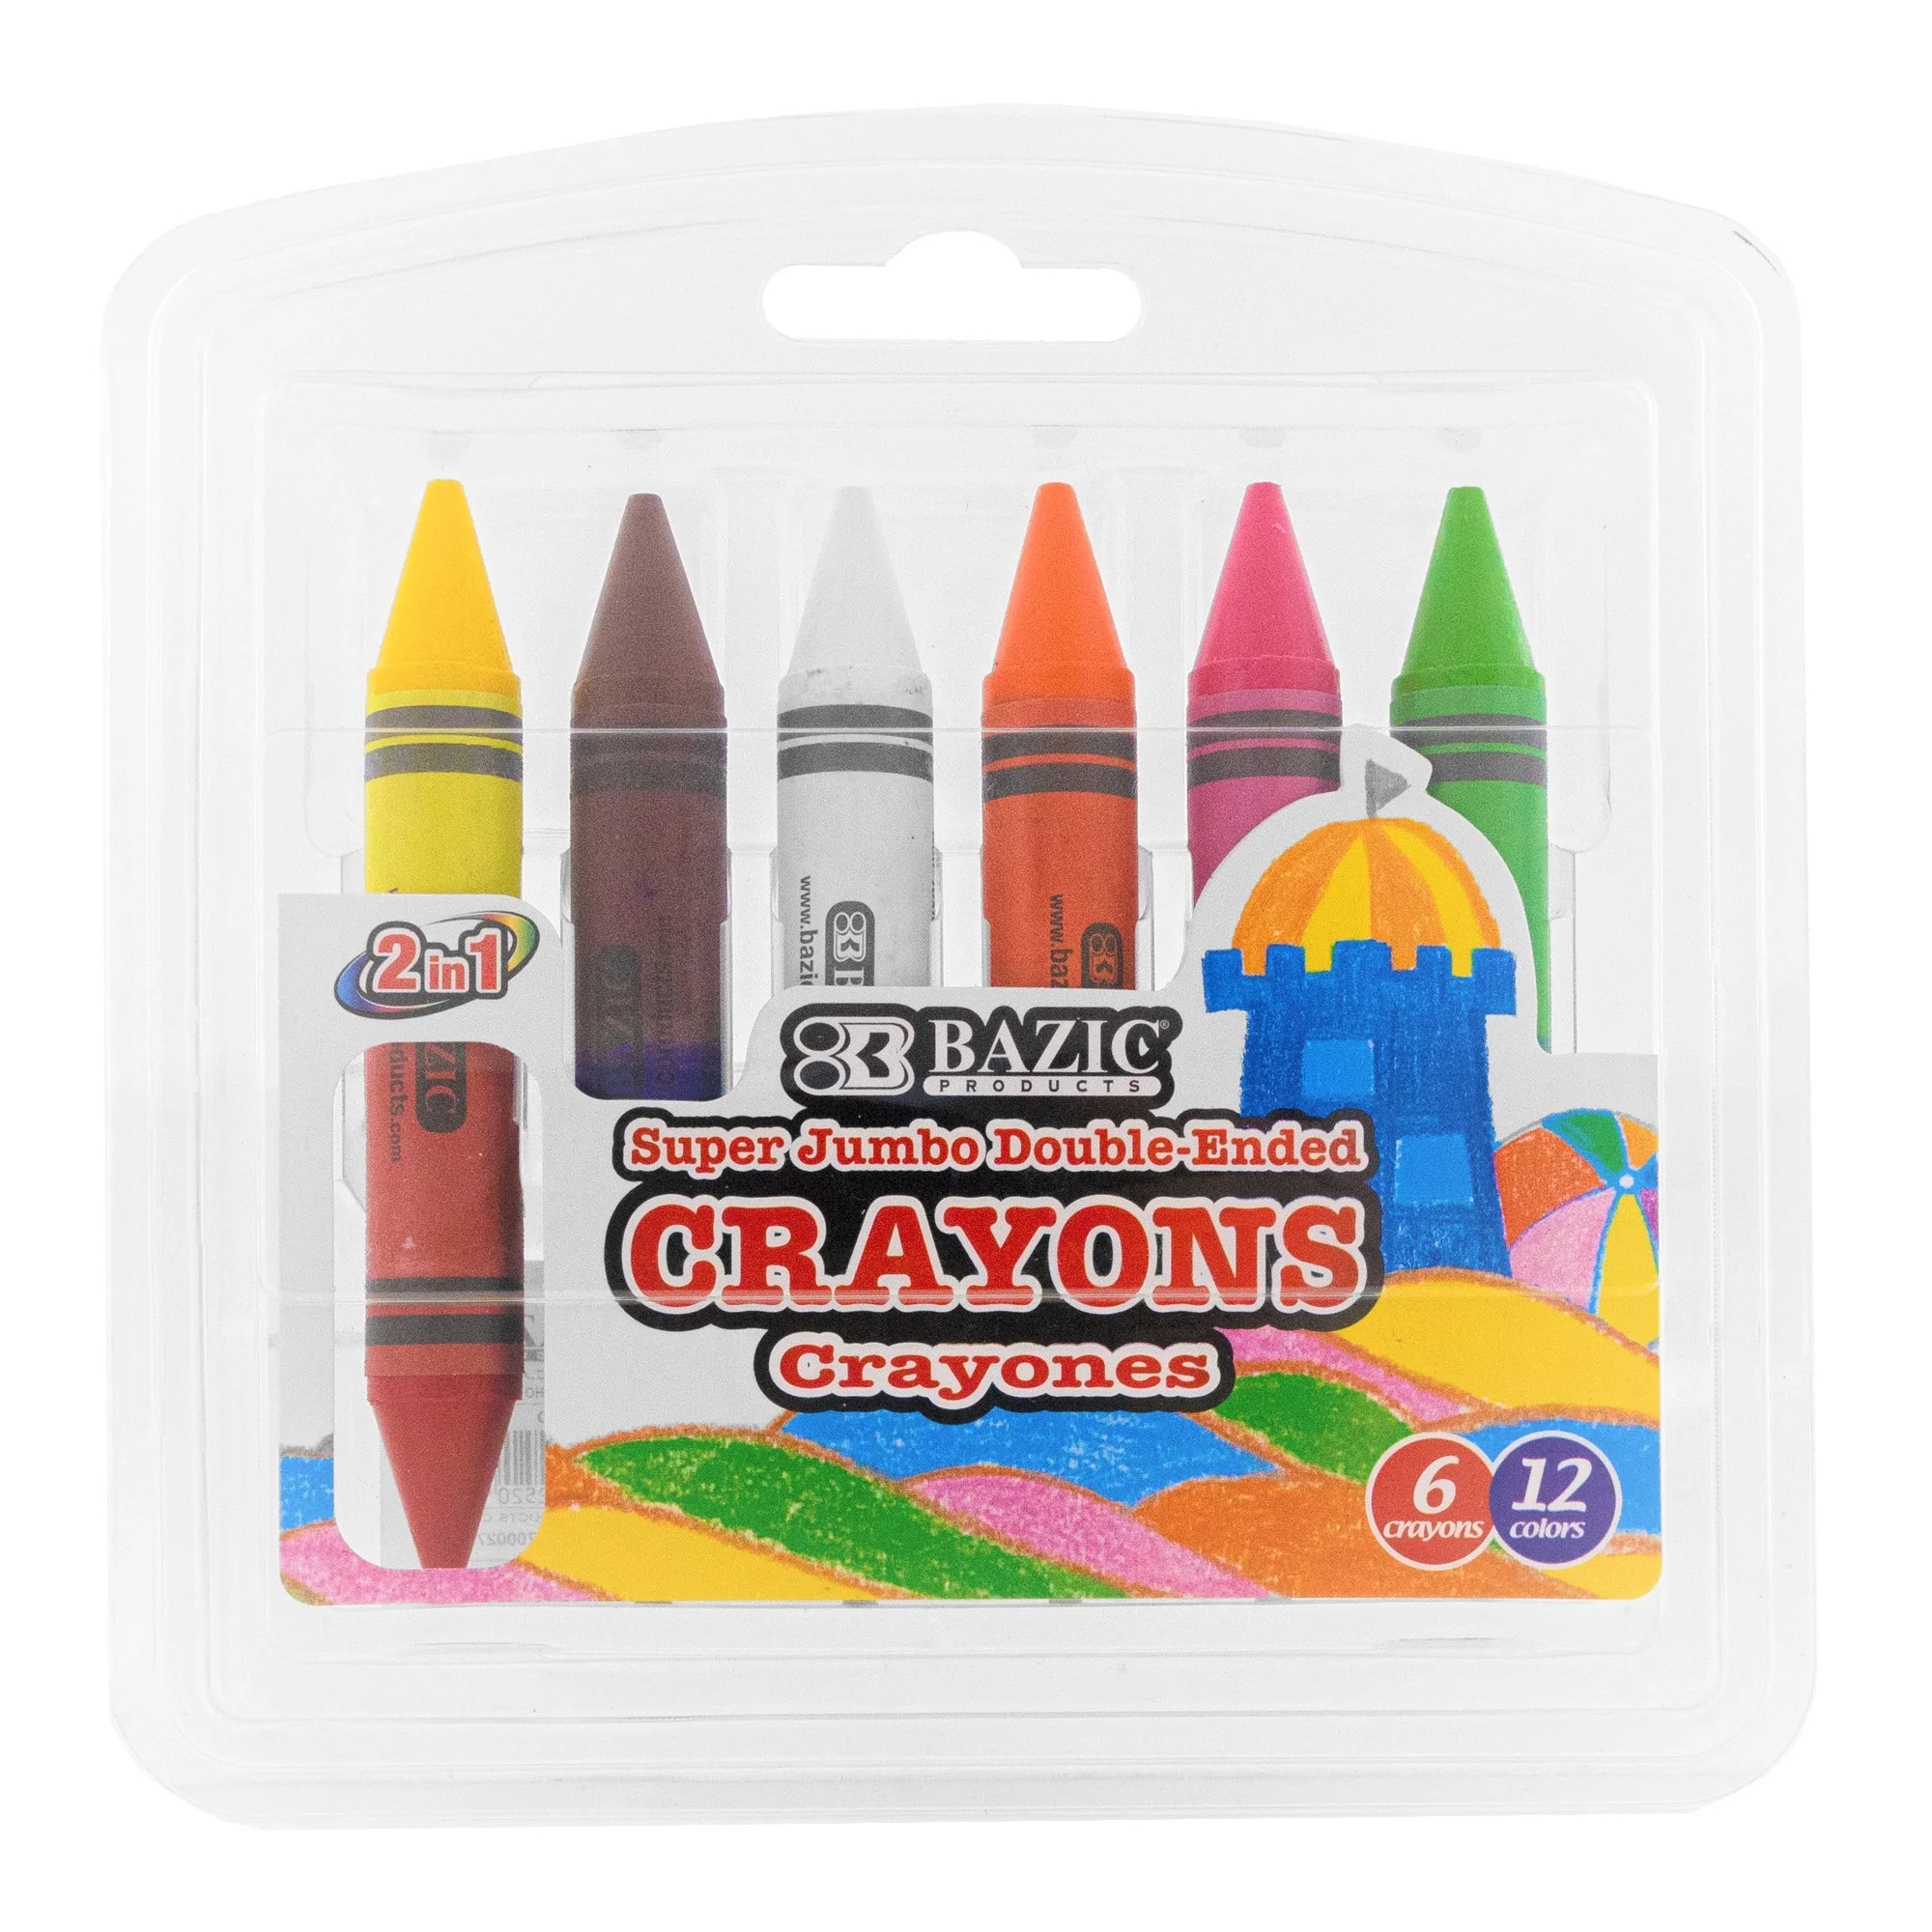 what to wear to a baseball game - Lipgloss and Crayons